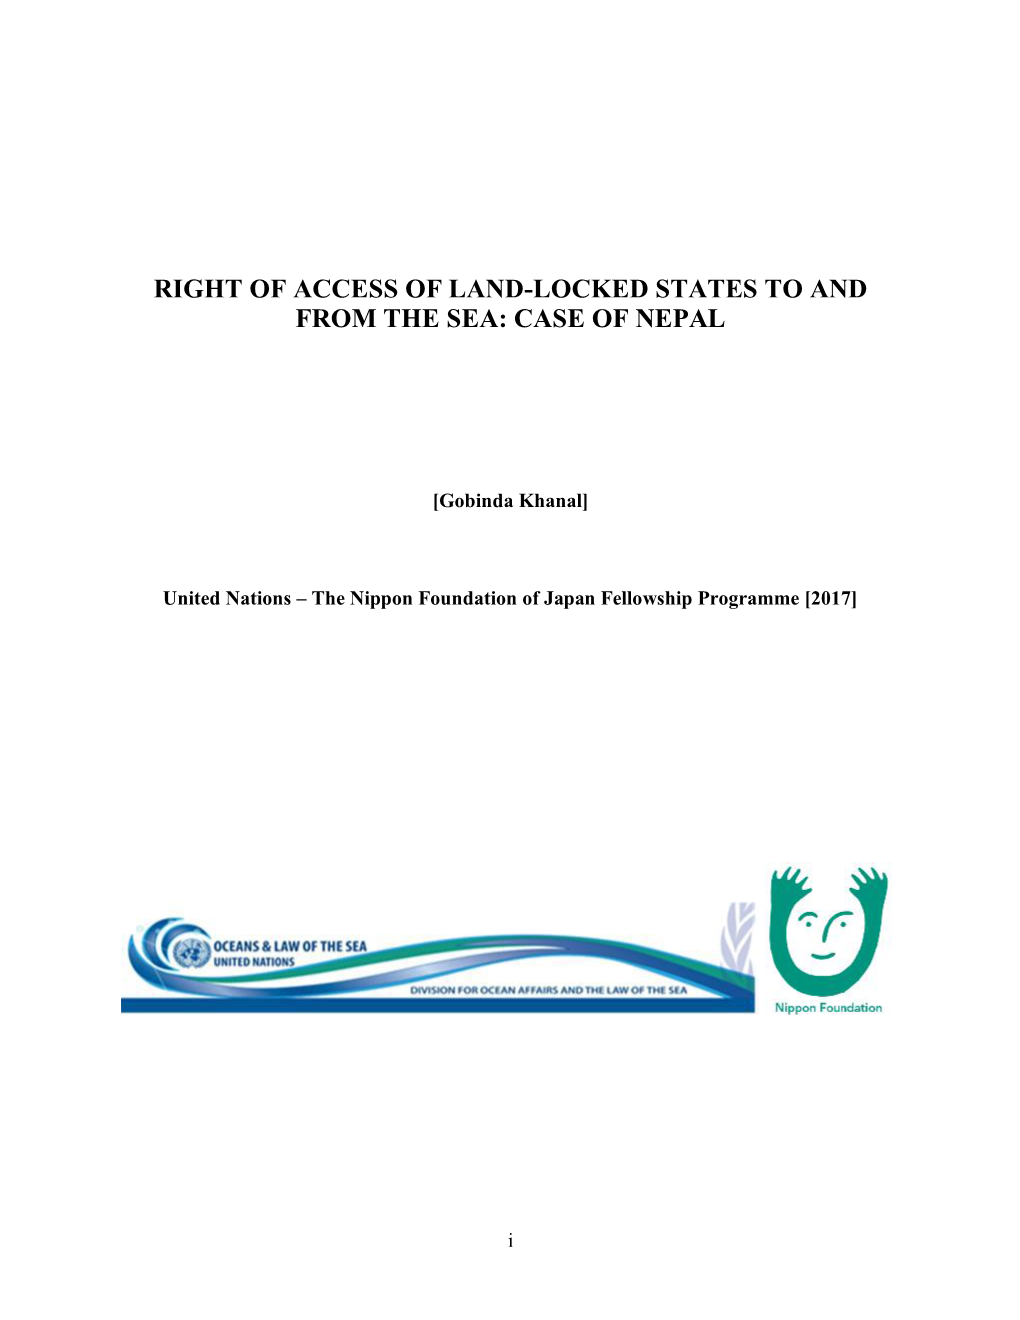 Right of Access of Land-Locked States to and from the Sea: Case of Nepal